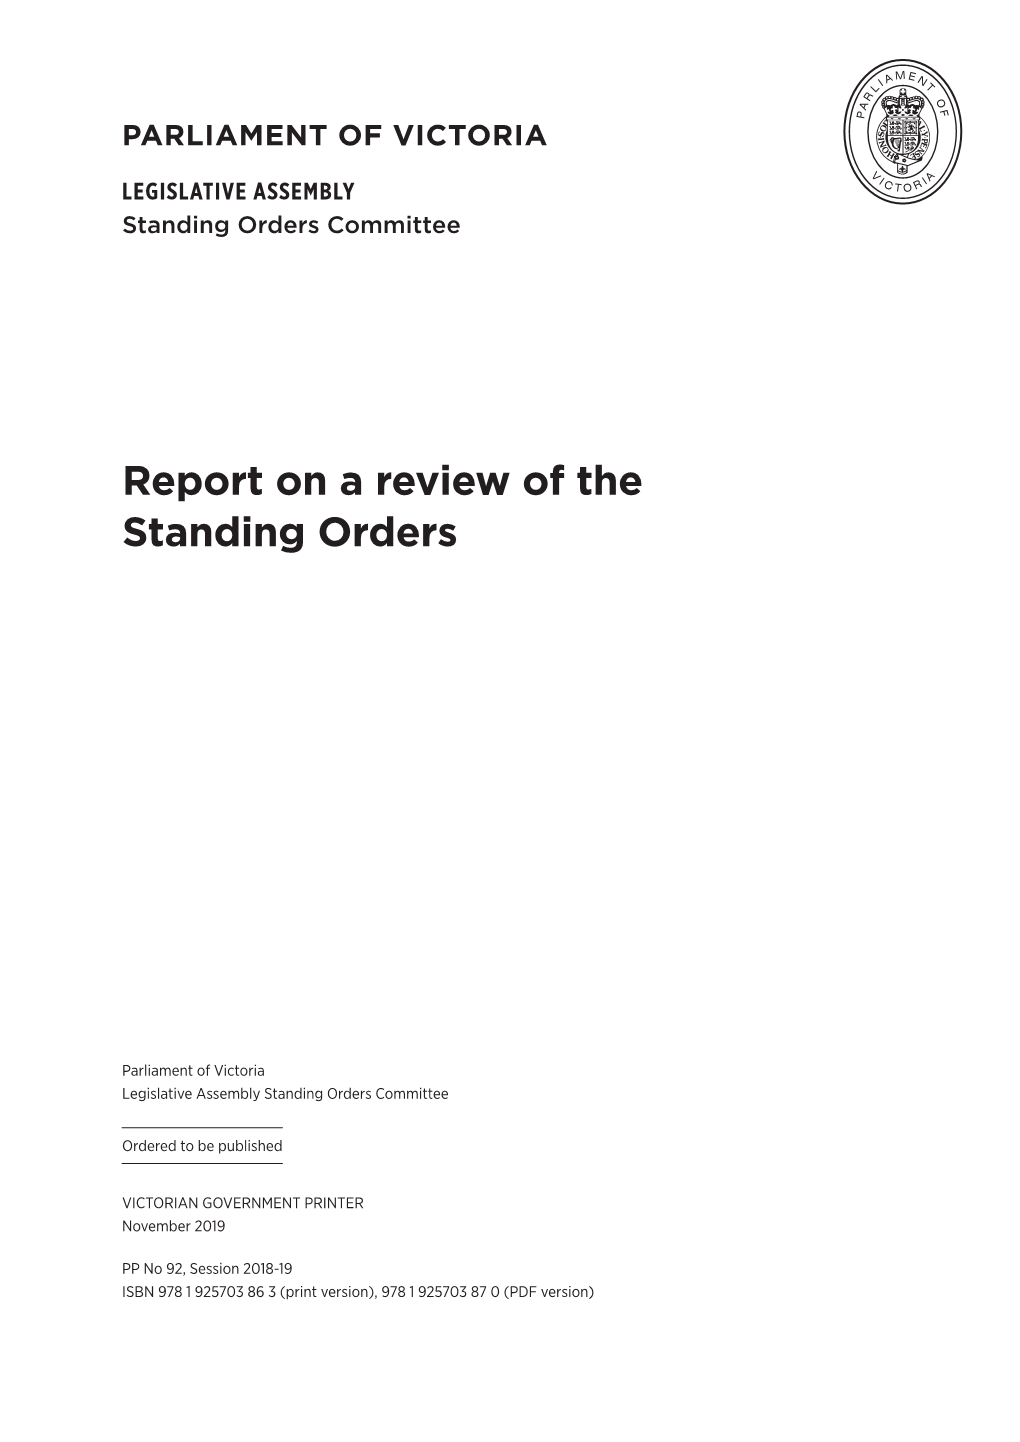 Report on a Review of the Standing Orders